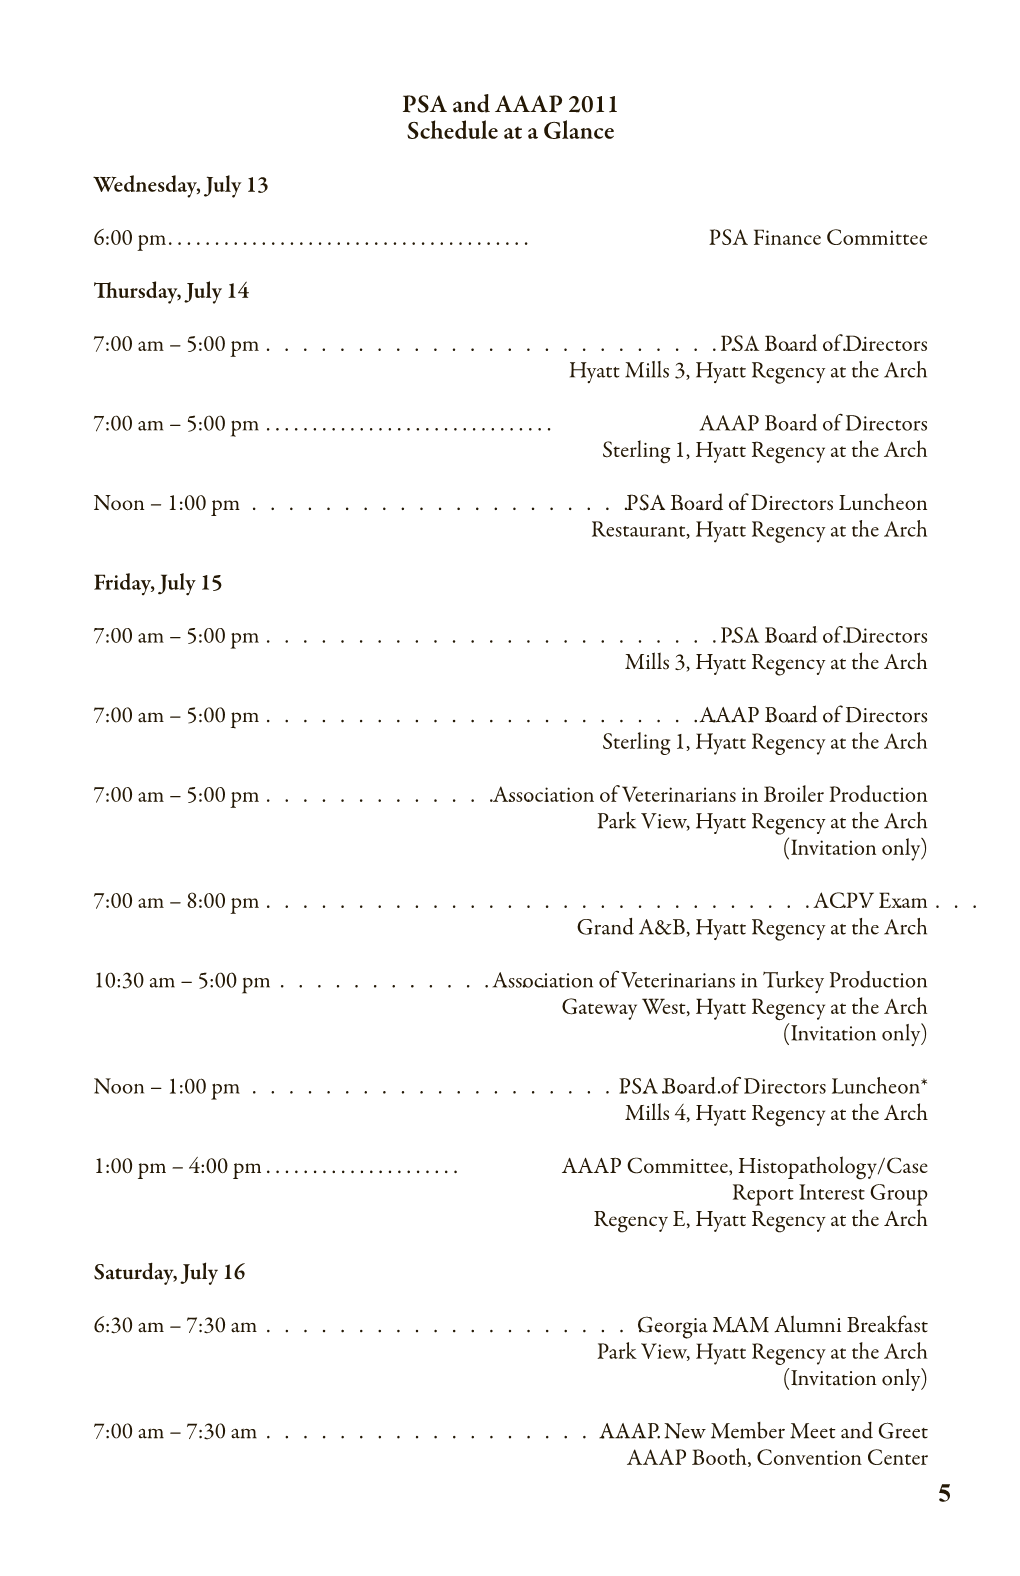 5 PSA and AAAP 2011 Schedule at a Glance